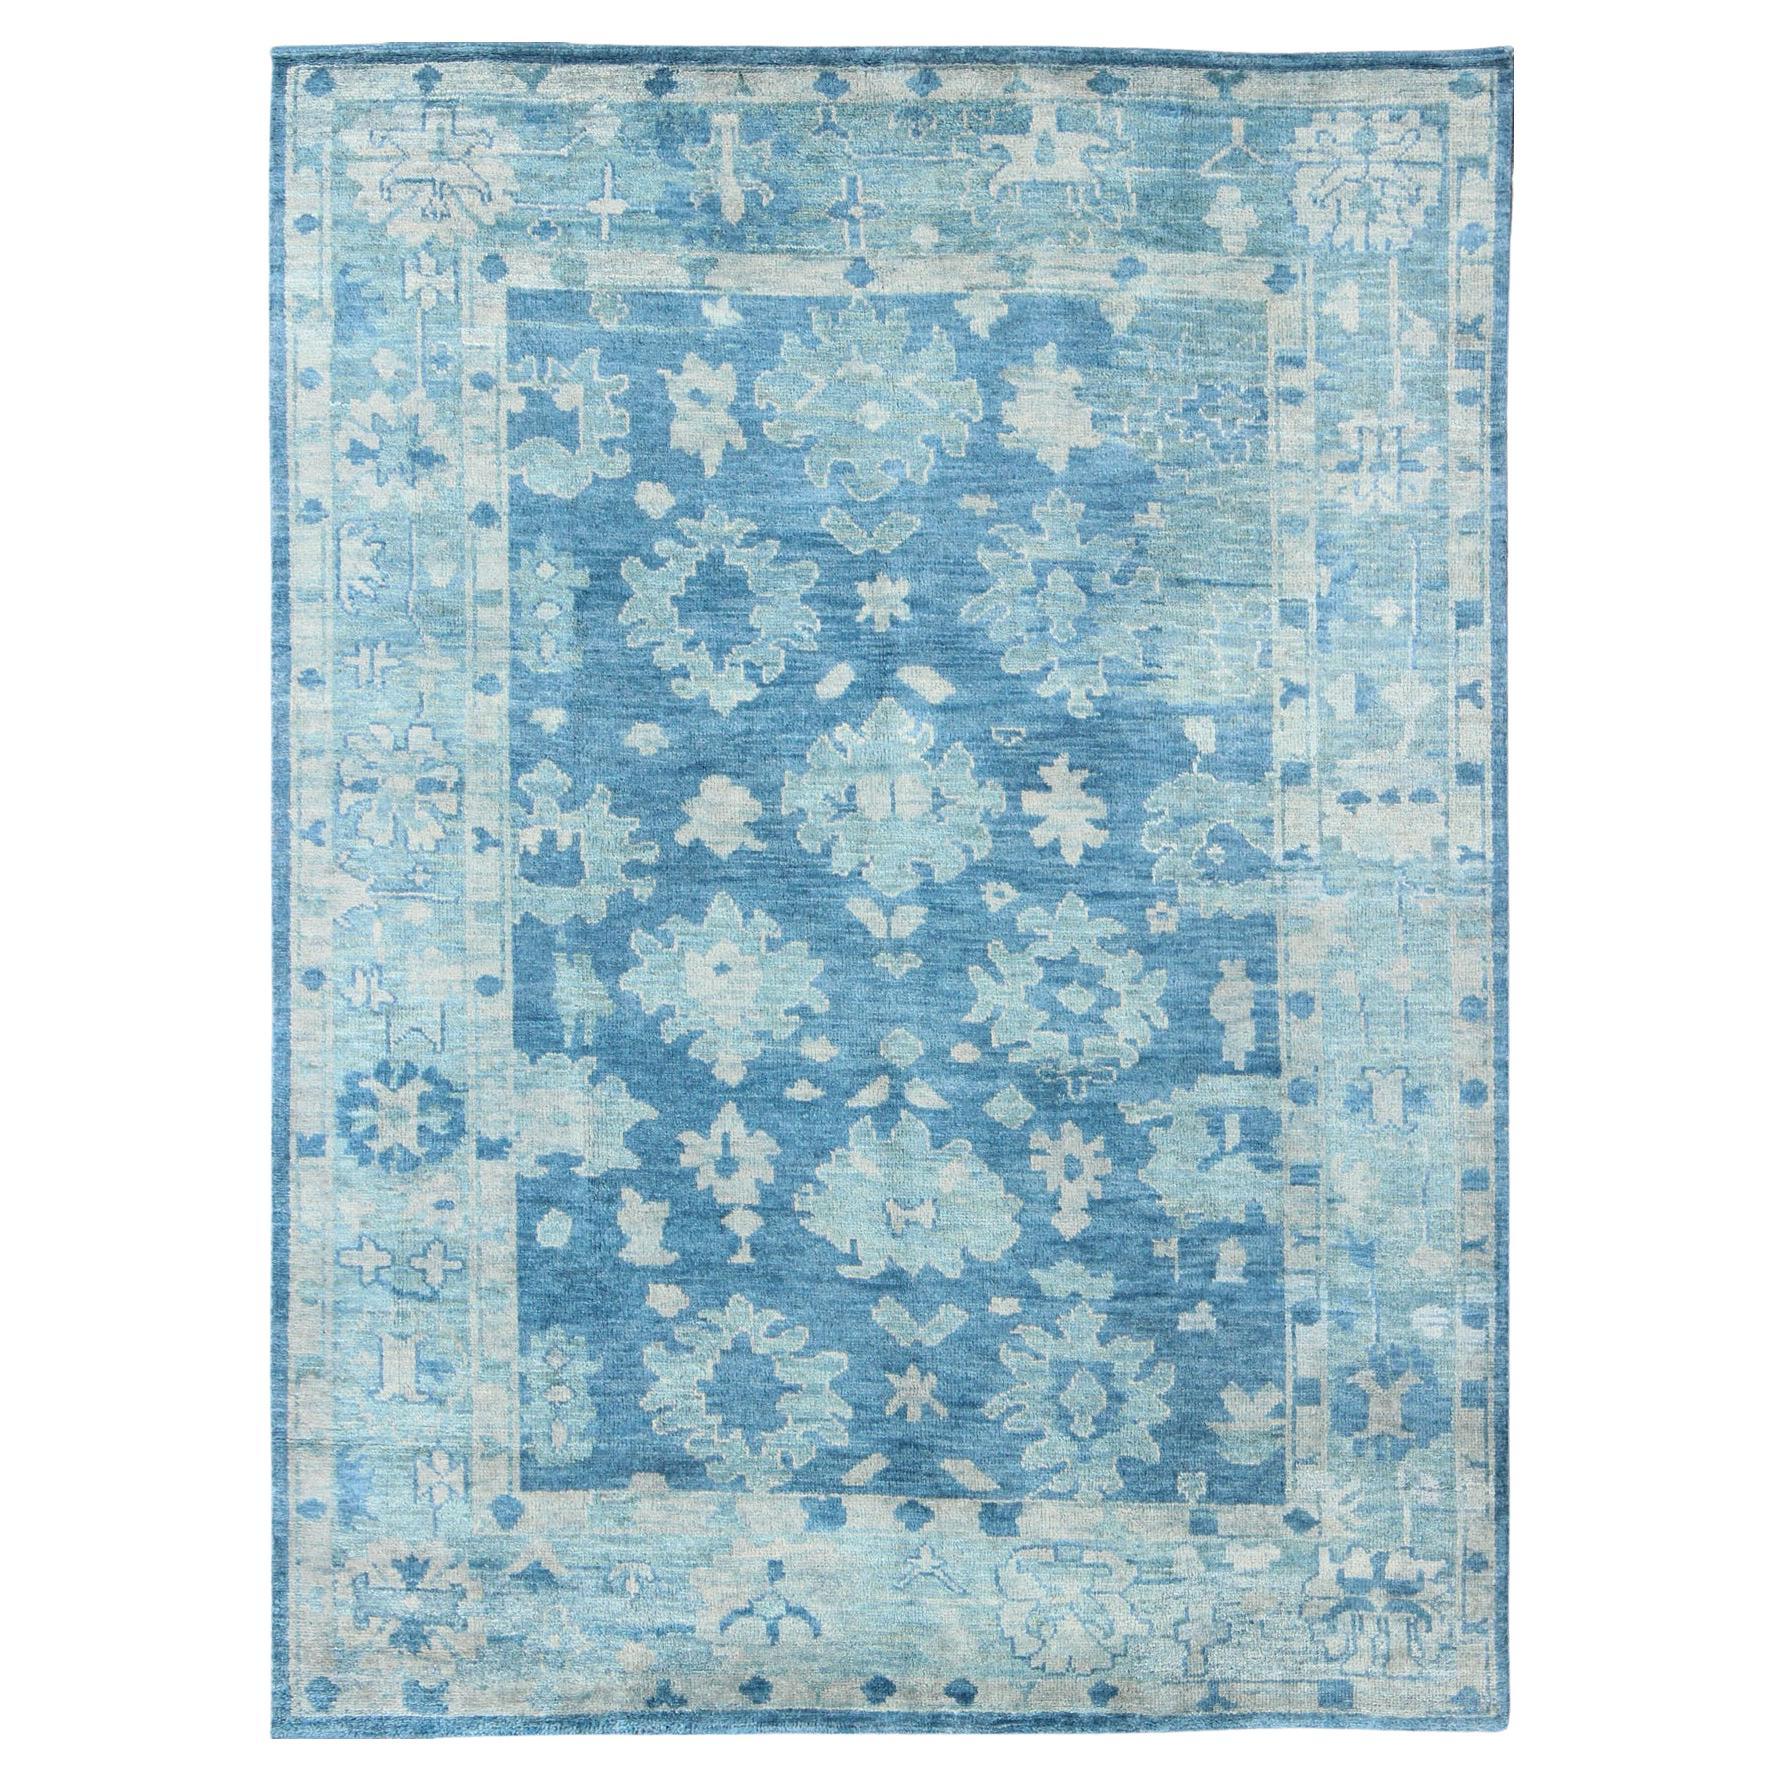  Modern Oushak Rug in Wool With Sub-Geometric Floral Design in Blue 